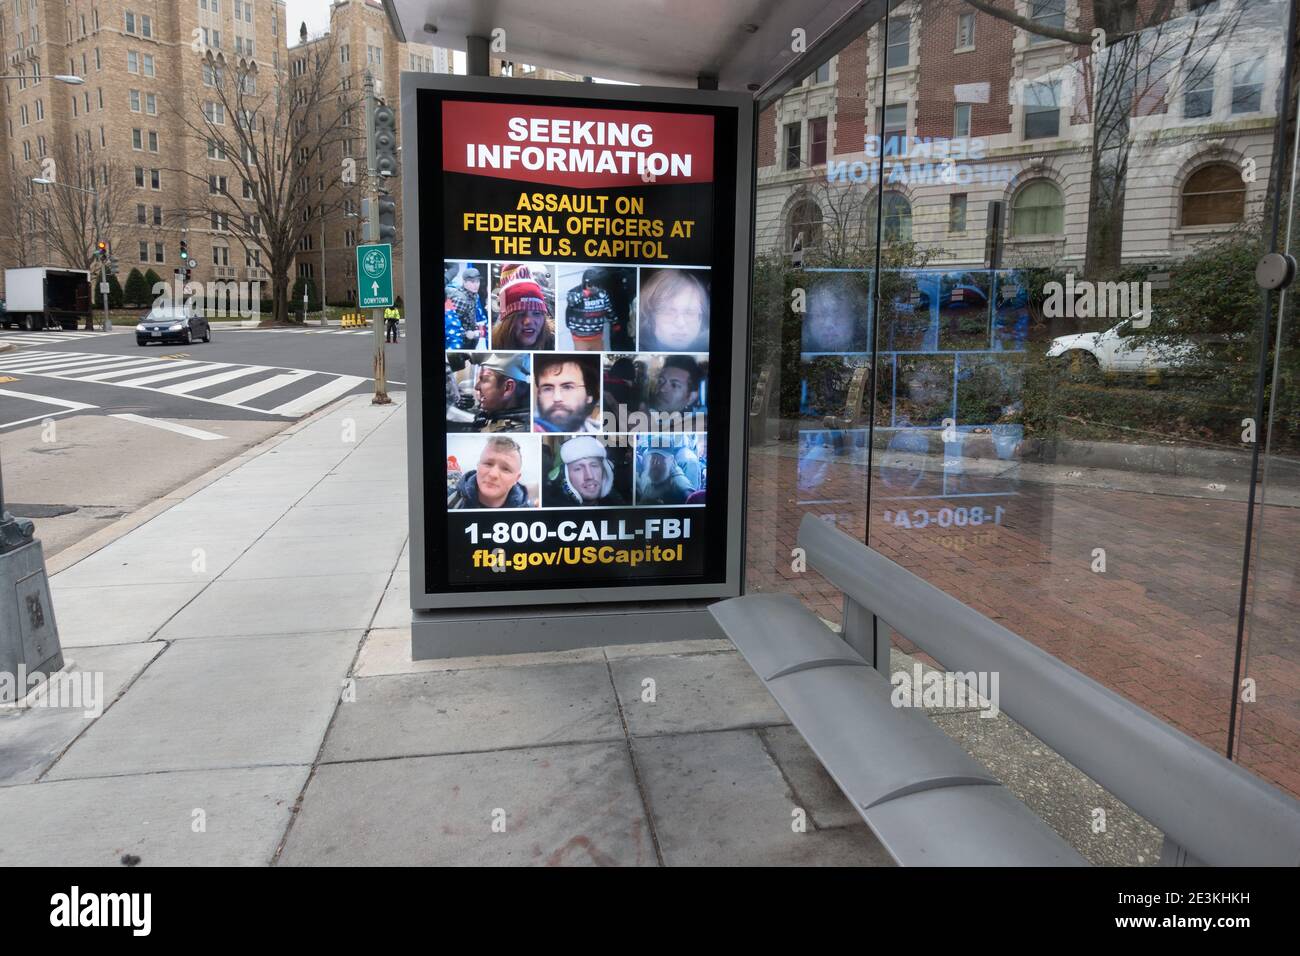 Digital sign at bus stop with rotating images of persons photographed during the storming of the U.S. Capitol on January 6, being sought by the Federal Bureau of Investigation. Washington, DC, Jan. 19, 2021 Stock Photo